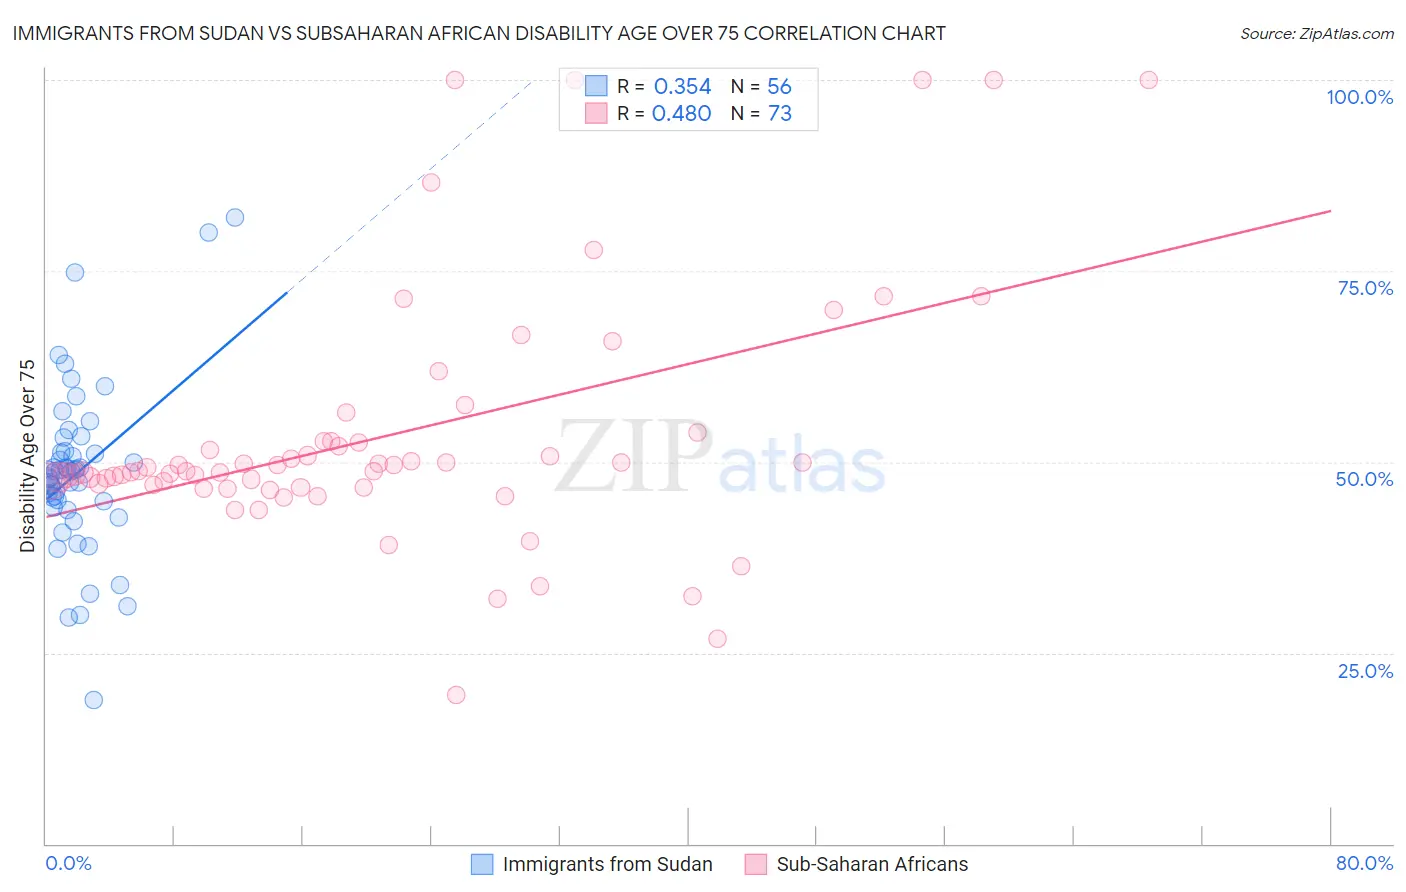 Immigrants from Sudan vs Subsaharan African Disability Age Over 75